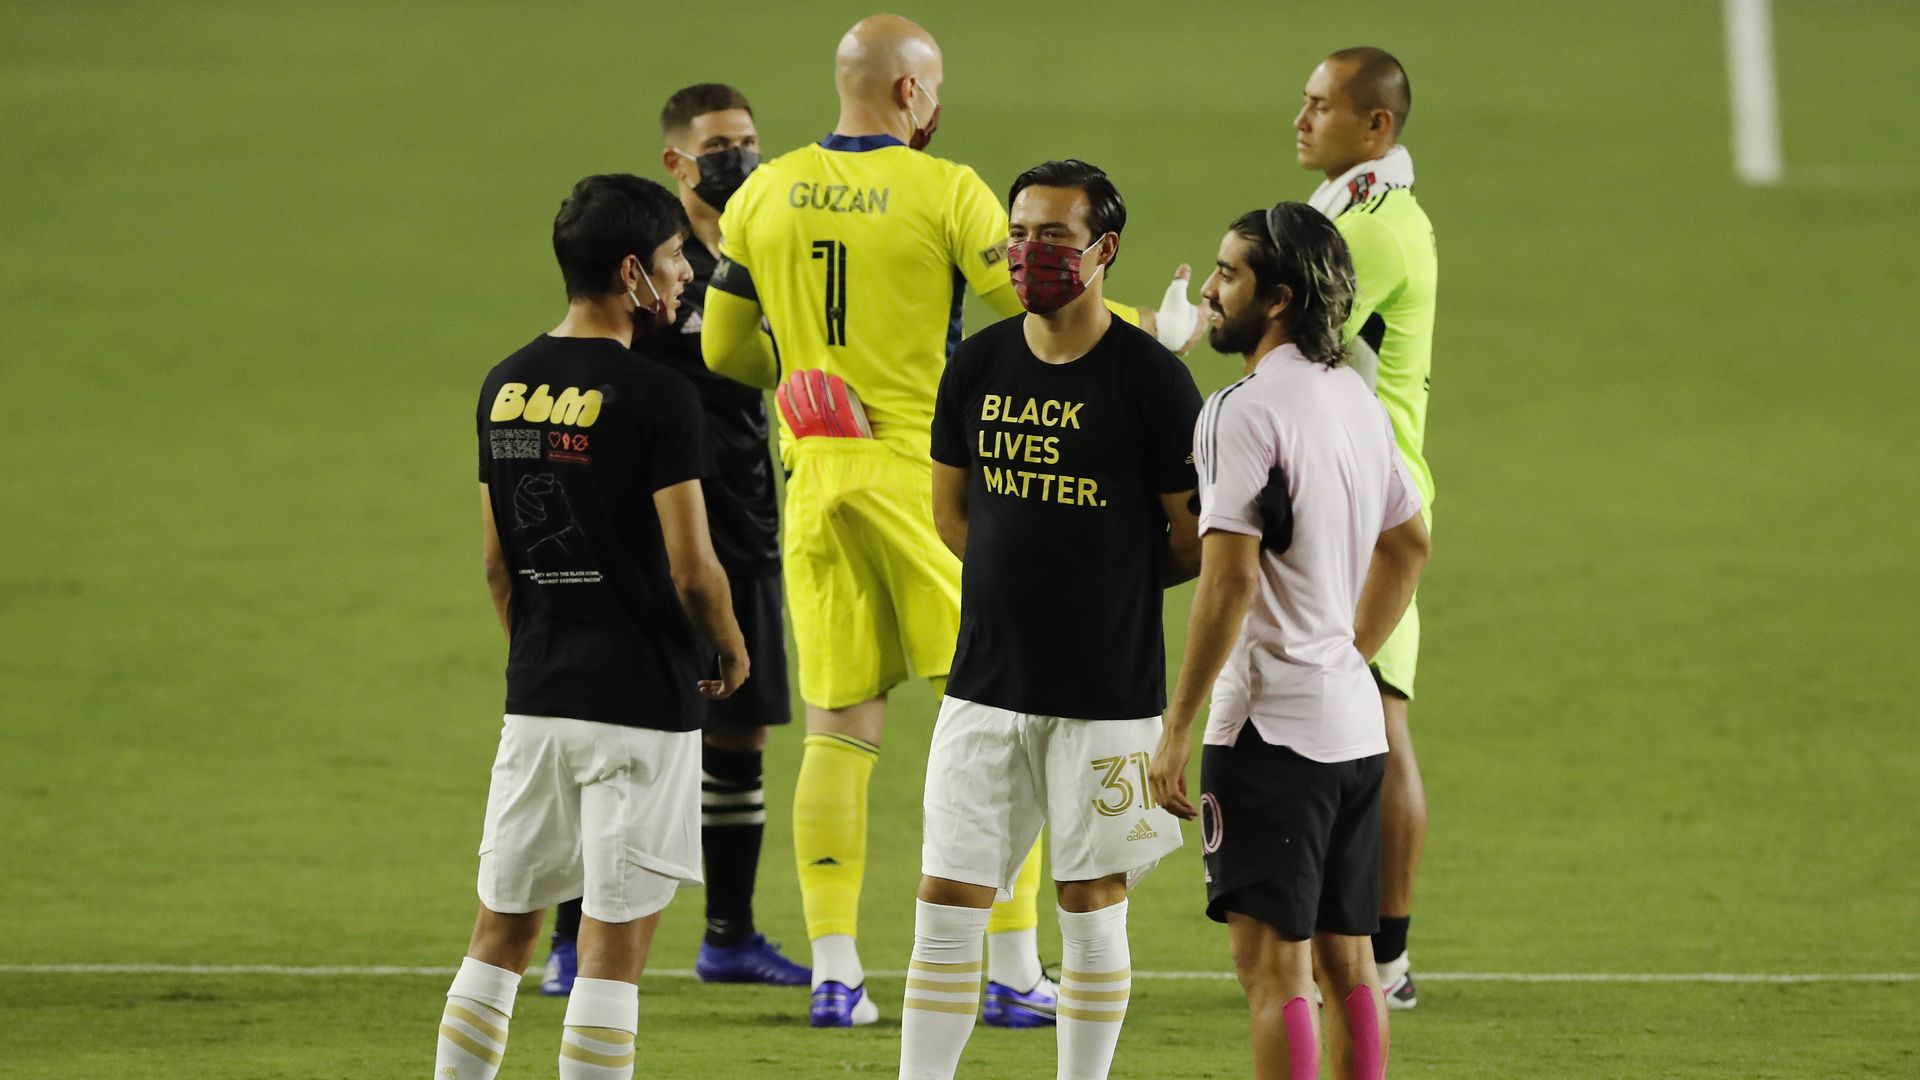 Erick Torres #31 of Atlanta United talks with Rodolfo Pizarro #10 of Inter Miami CF after the game was postponed.